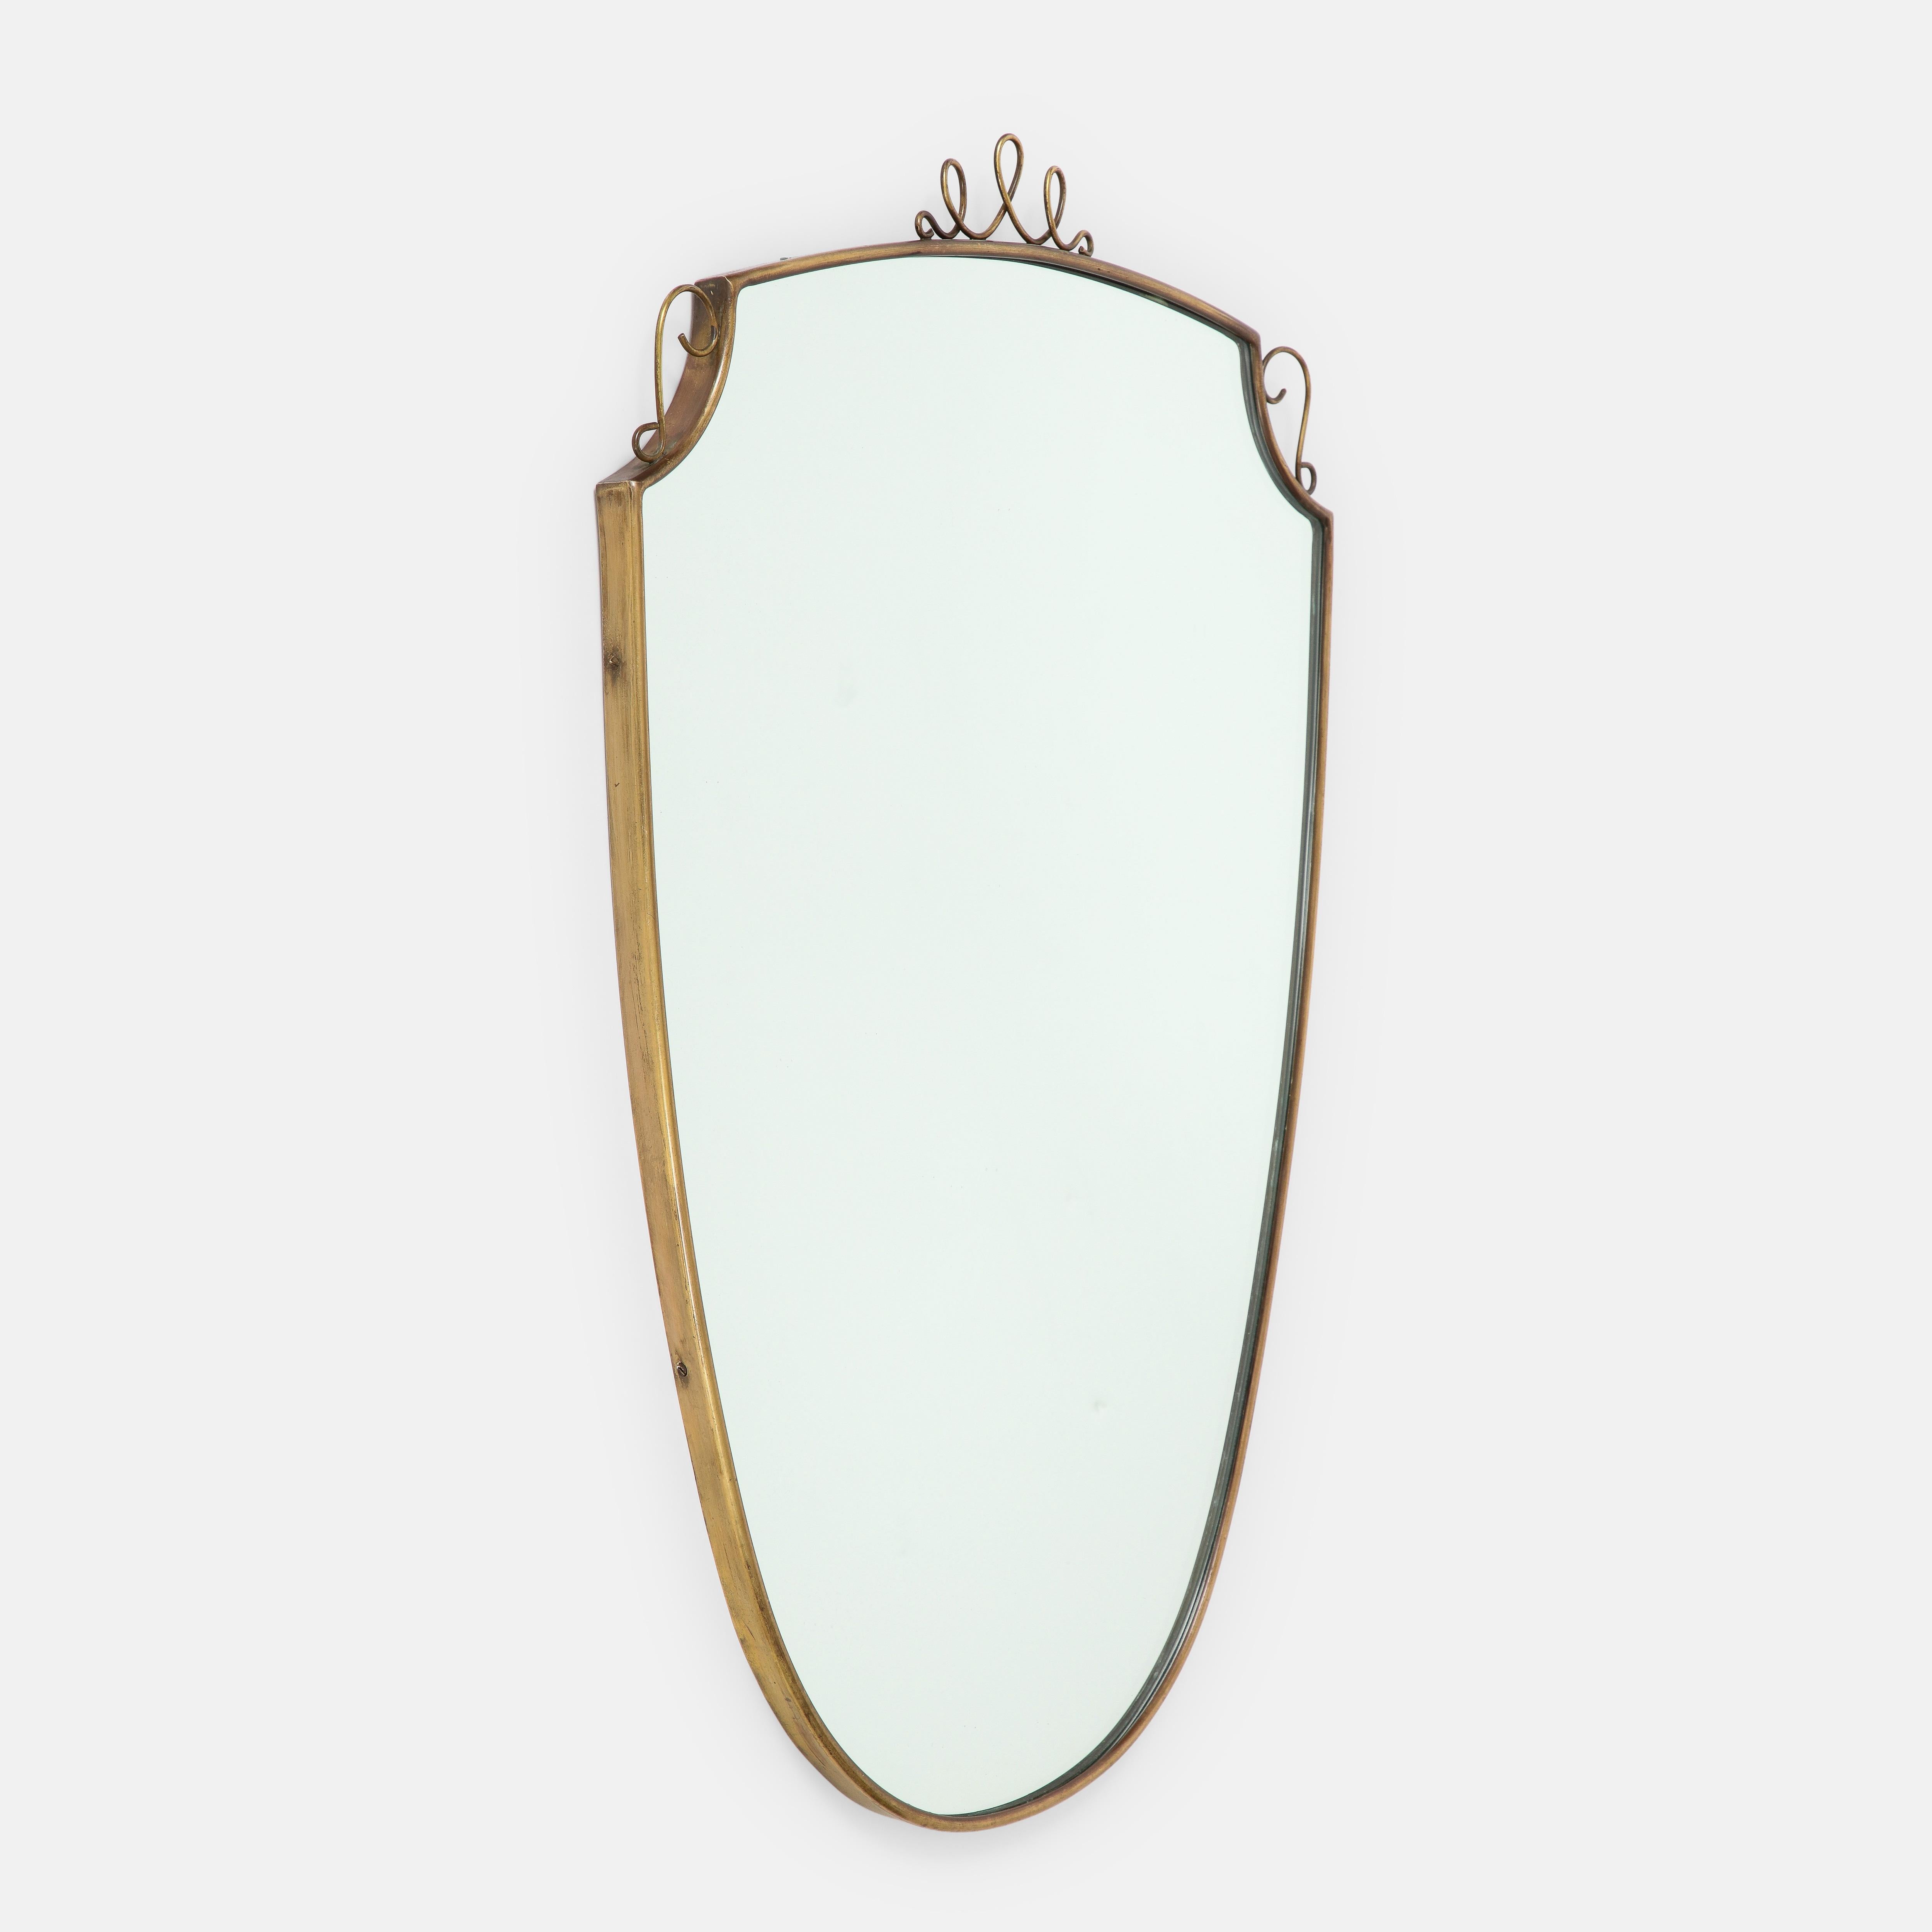 1950s Italian shield shaped brass wall mirror with scroll decorations. This original midcentury period mirror has beautiful rich patina to the brass with wood backing.